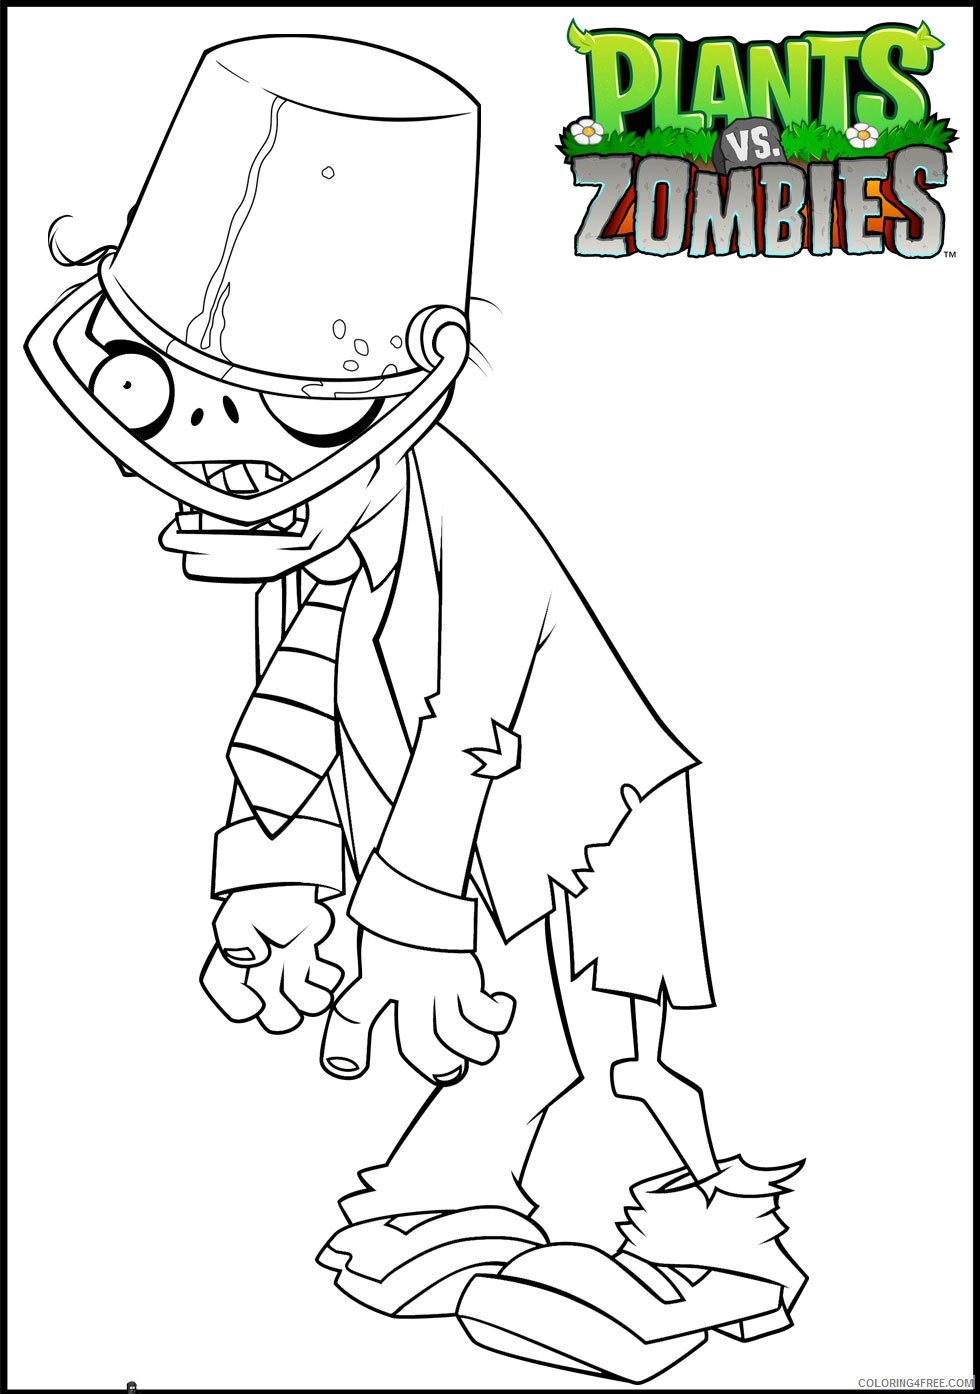 plants vs zombies coloring pages buckethead zombie Coloring4free